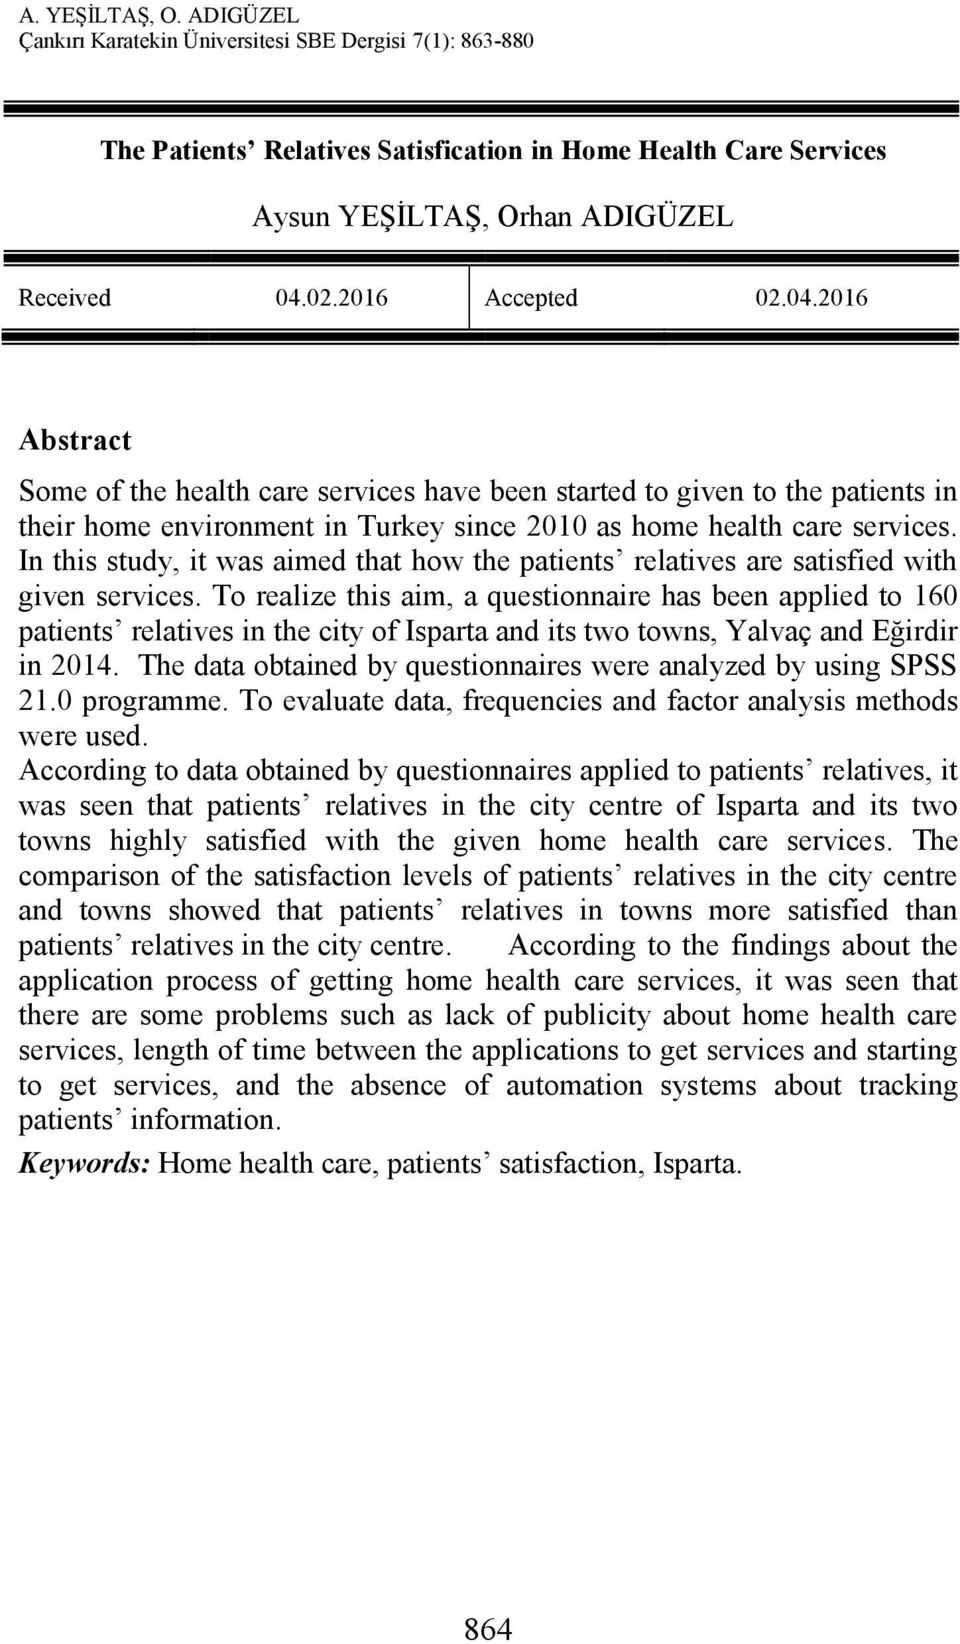 In this study, it was aimed that how the patients relatives are satisfied with given services.